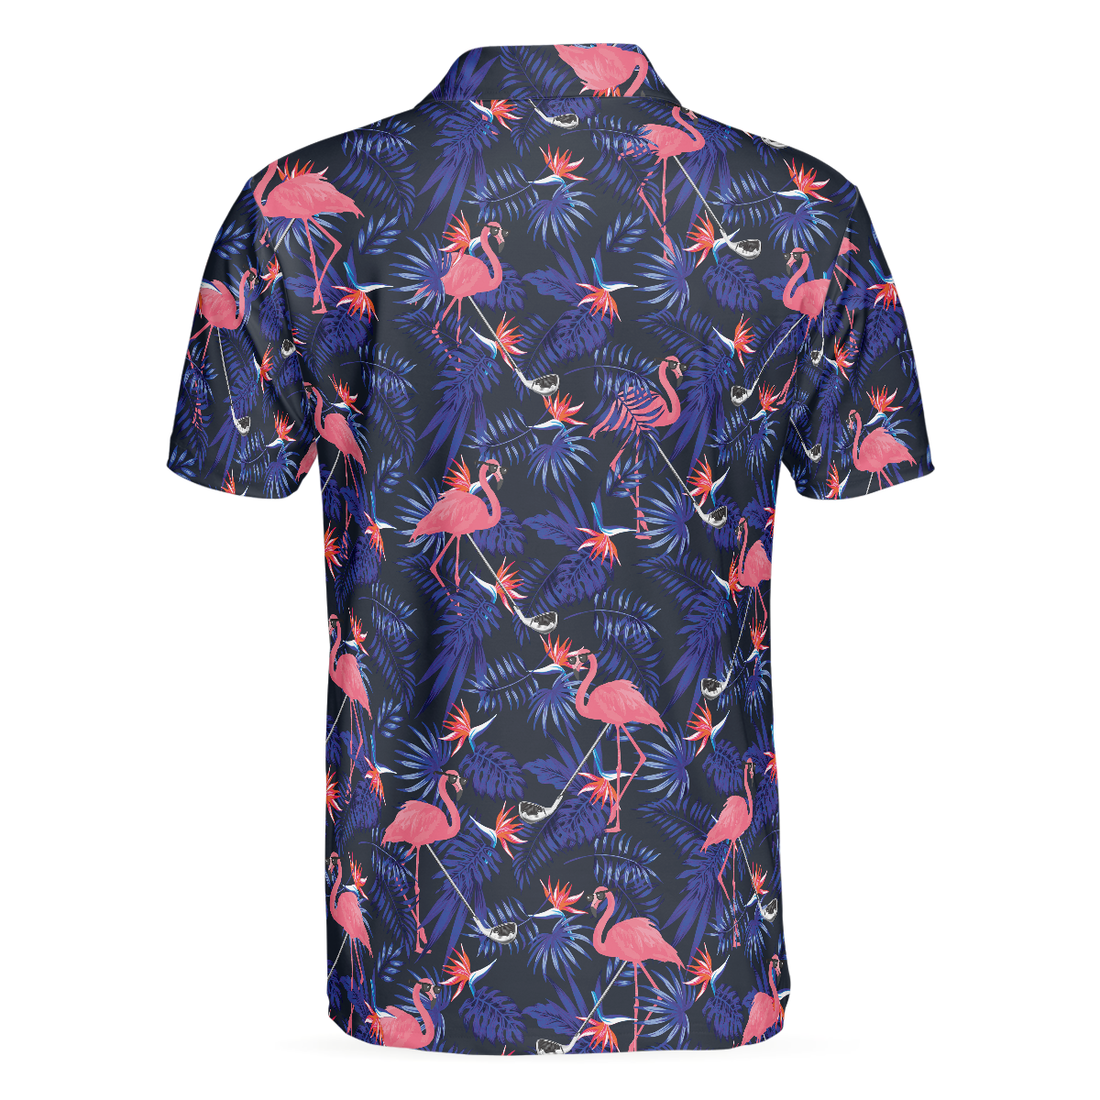 Flower And Flamingo Golf Polo Shirt Blue Flamingo Pattern Shirt For Golf Players Gift For Flamingo Fans - 1